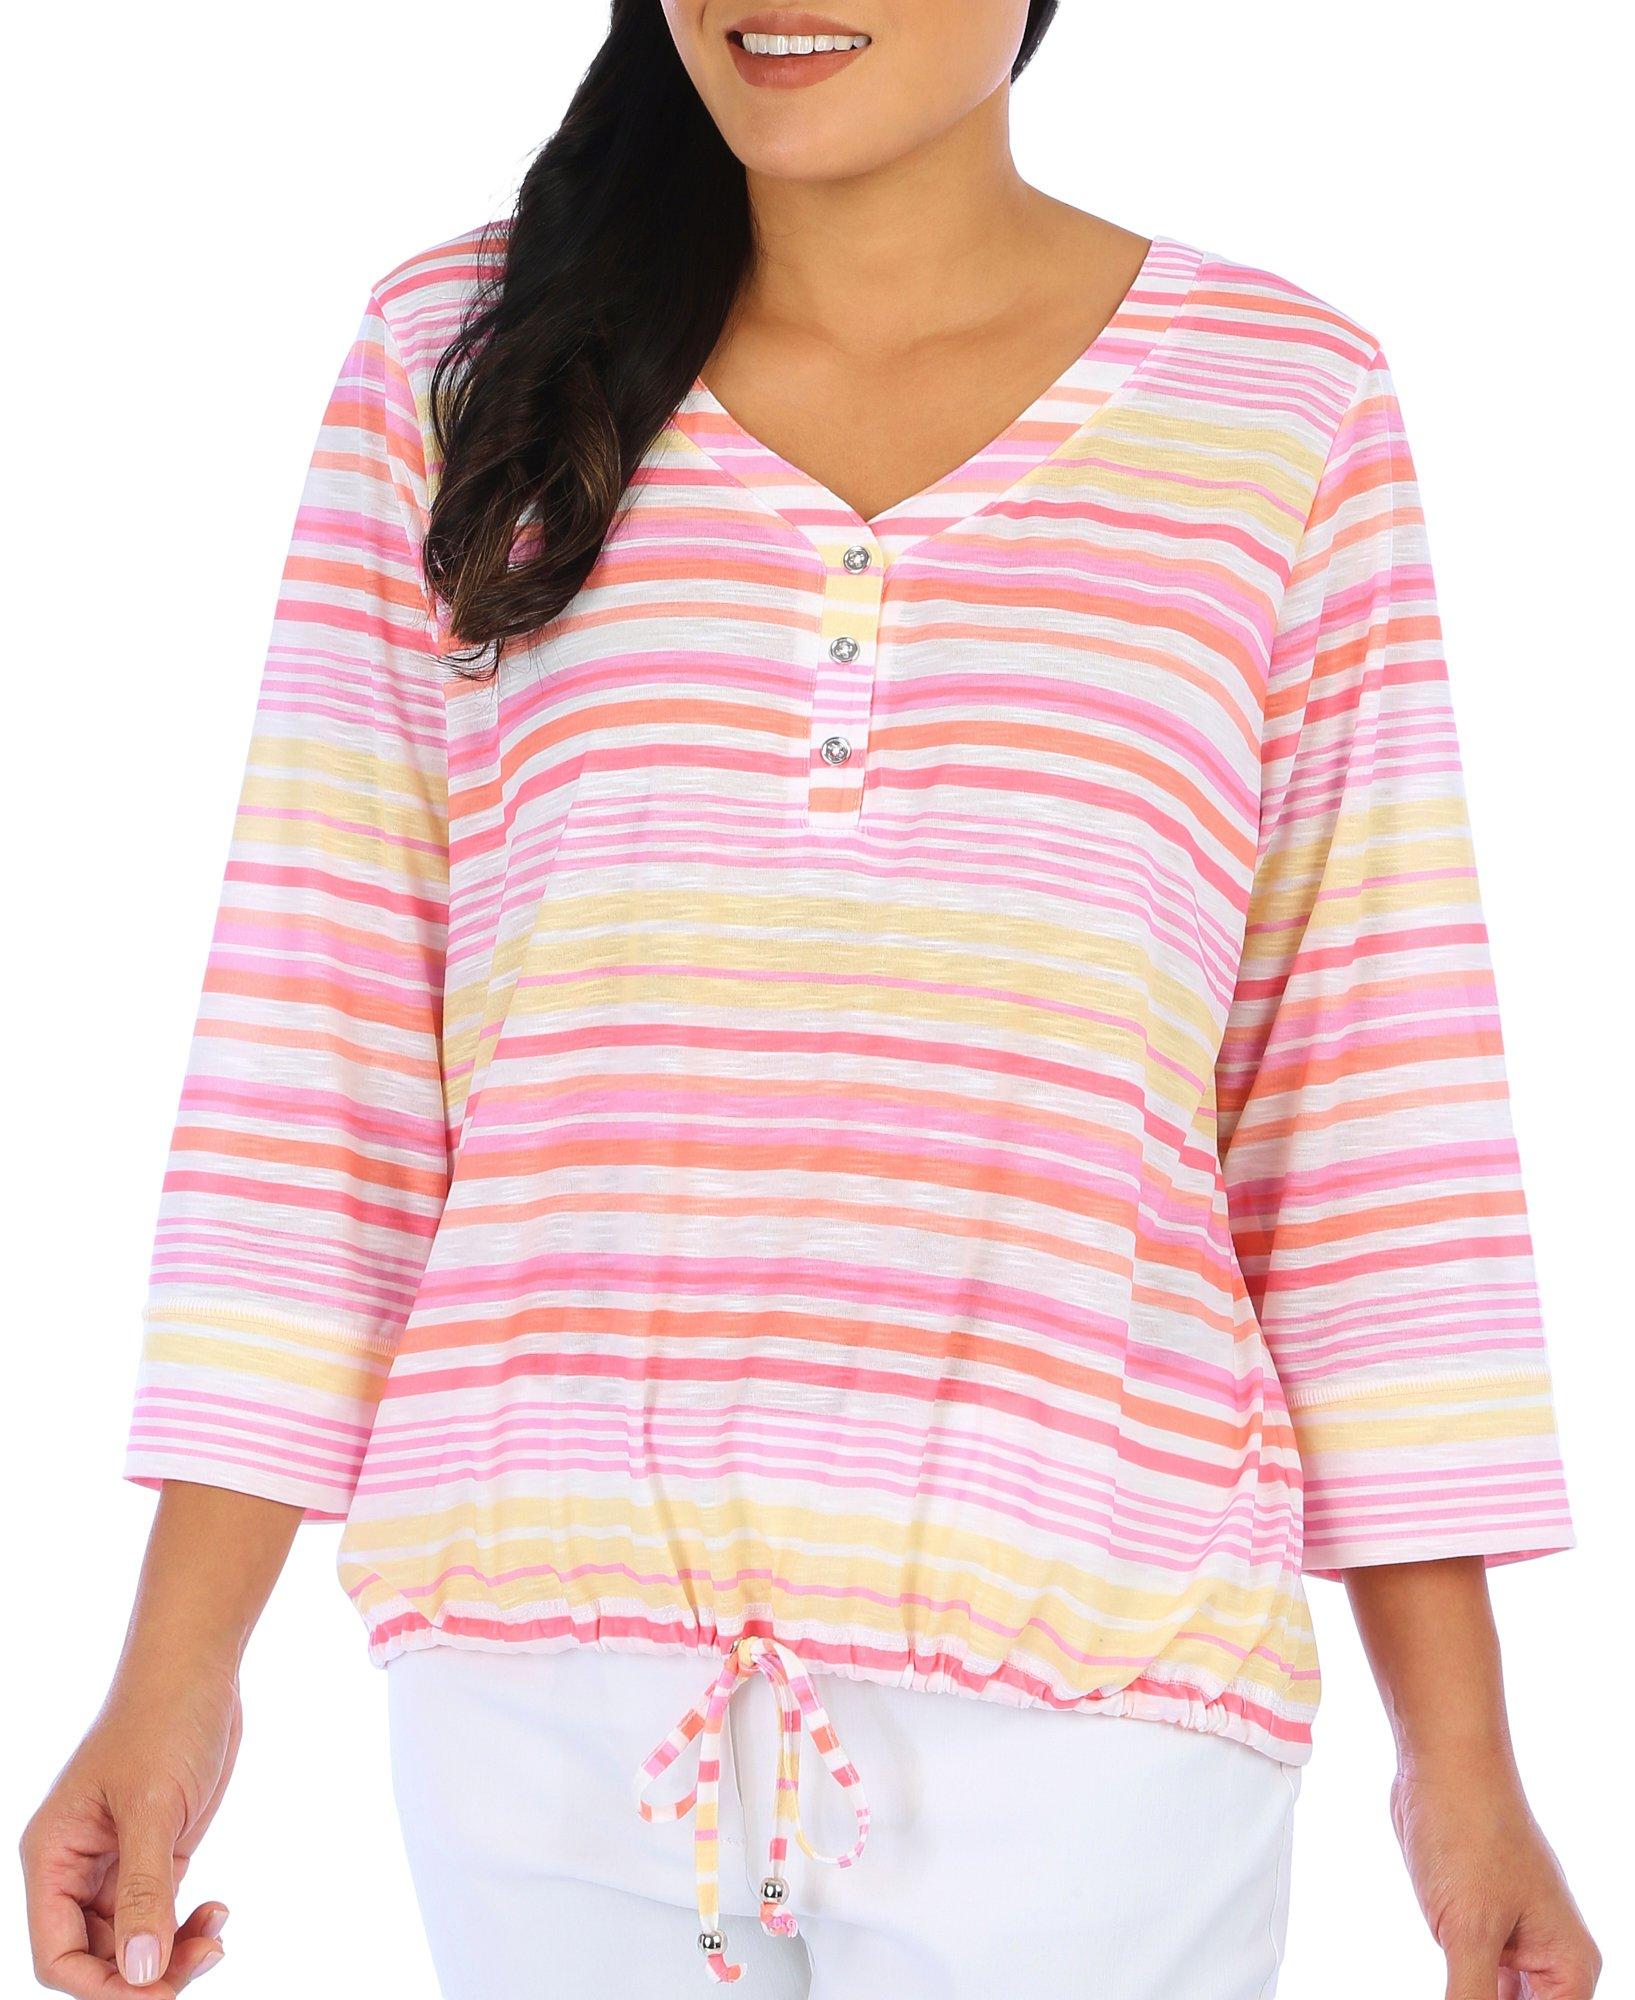 Womens Embellished Striped 3/4 Sleeve Top